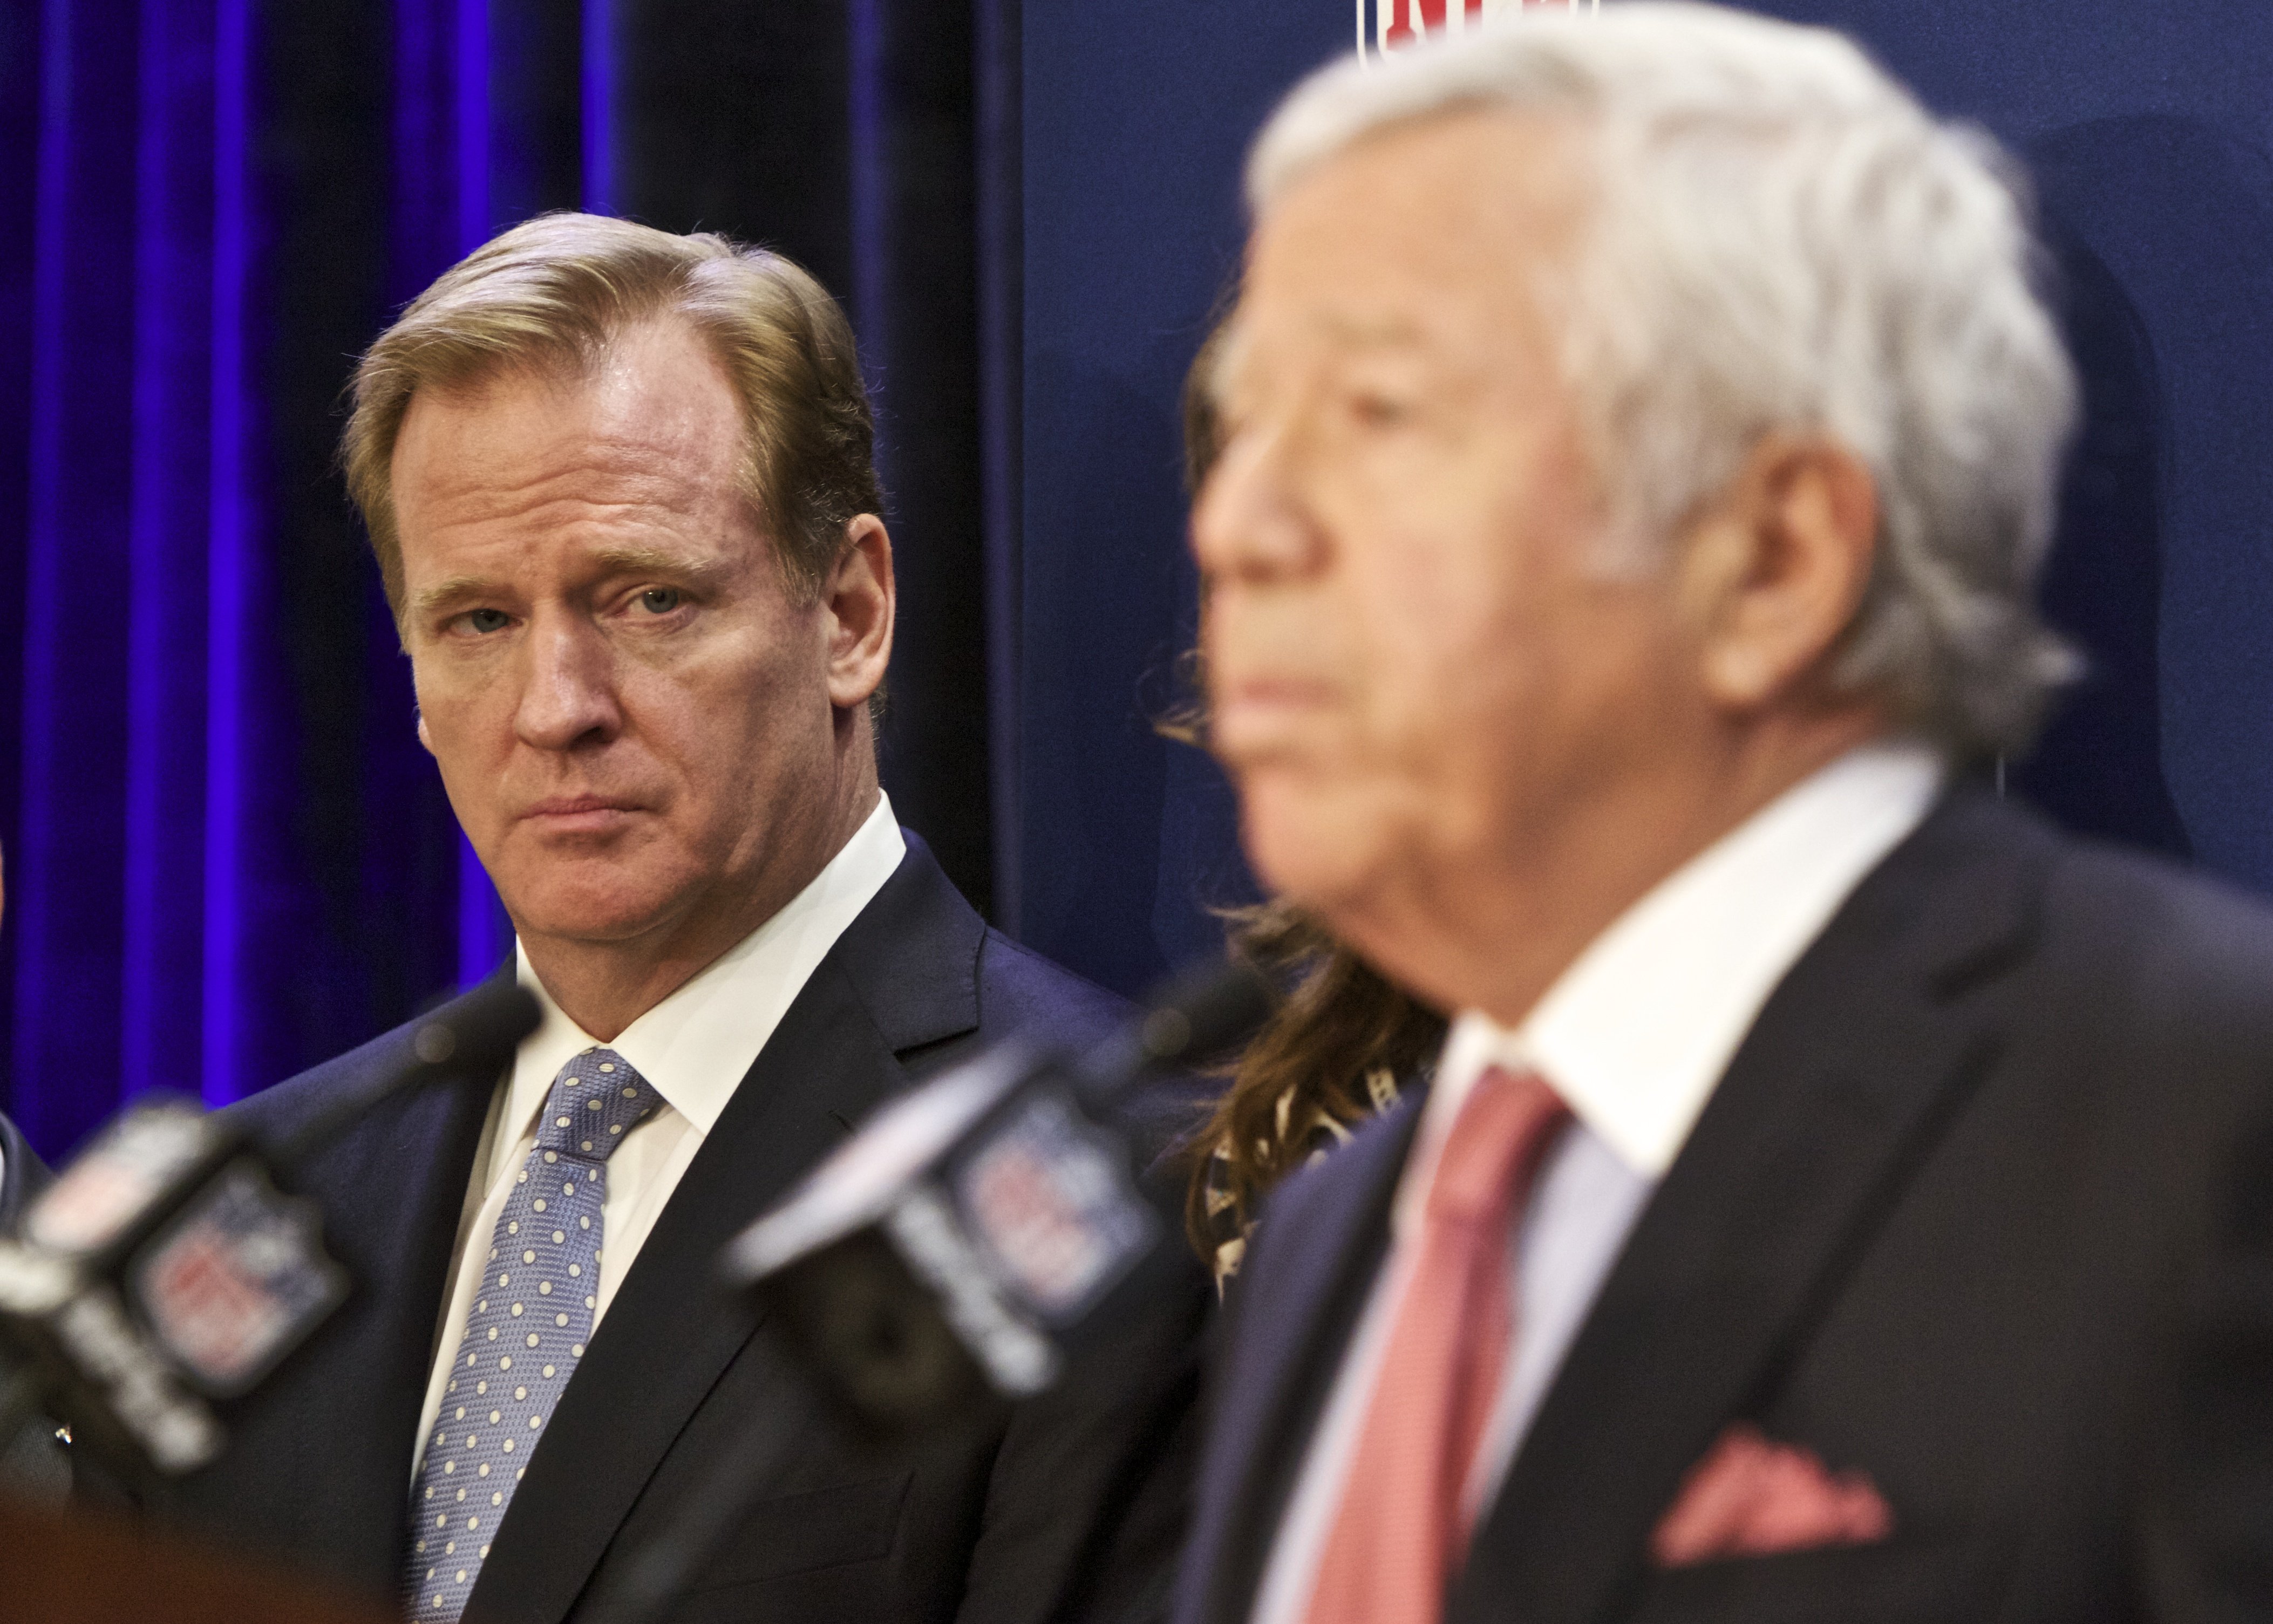 NFL commissioner Roger Goodell looks on as New England Patriots owner Robert Kraft speaks at an NFL press conference announcing new measures for the league's personal conduct policy during an owners meeting on Dec. 10, 2014, in Irving, Texas.